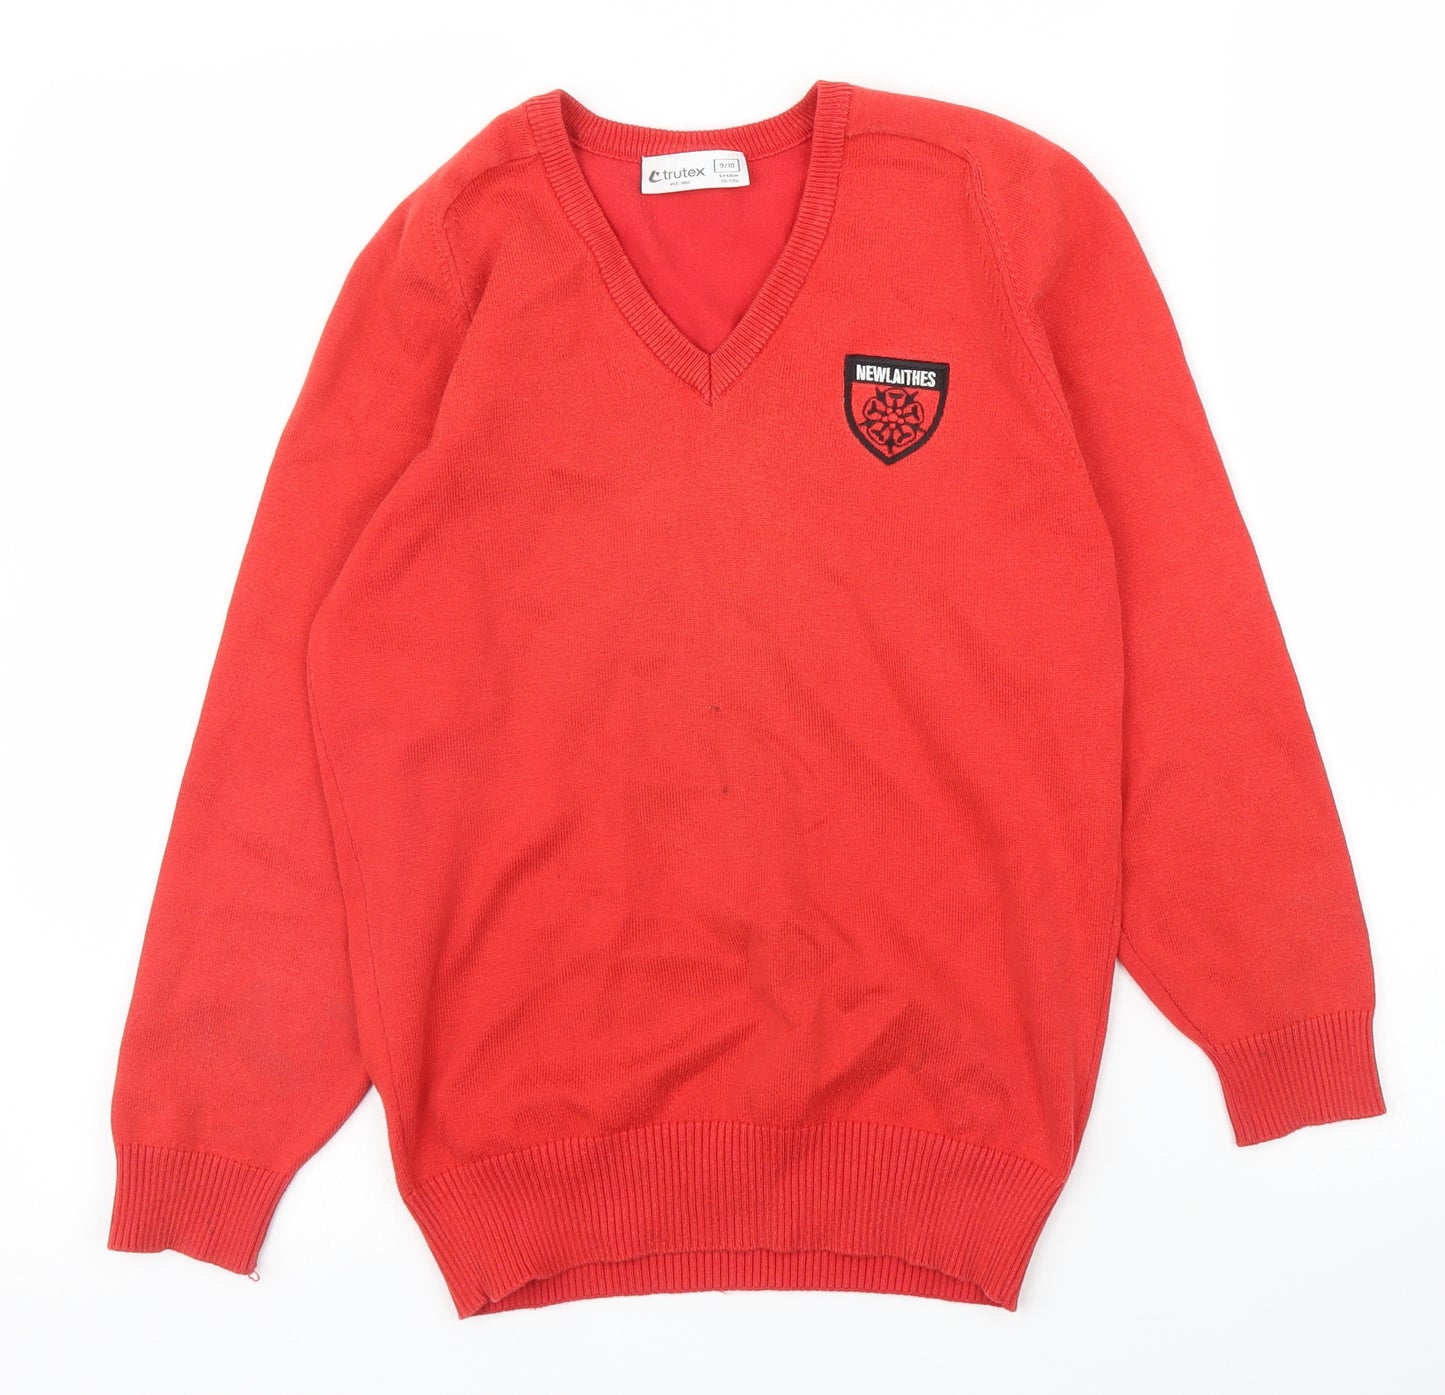 Trutex Boys Red   Pullover Jumper Size 9 Years